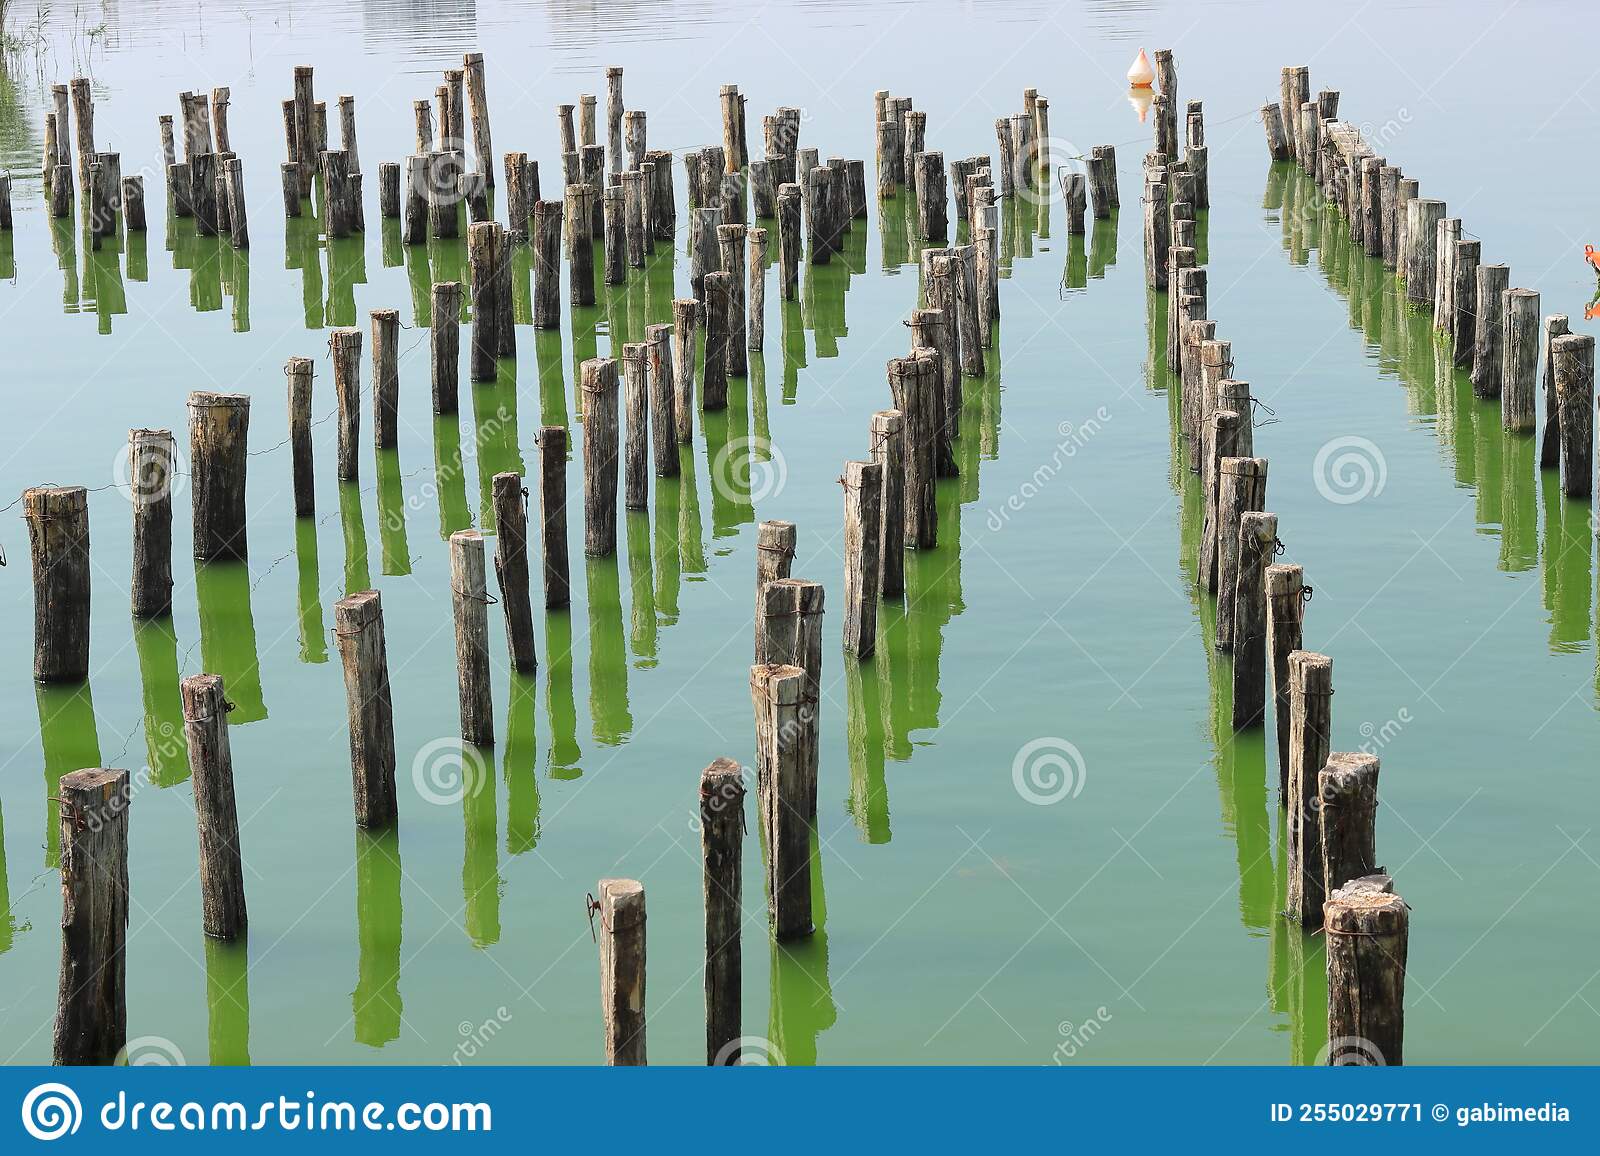 Wooden piers at the edge of a lake